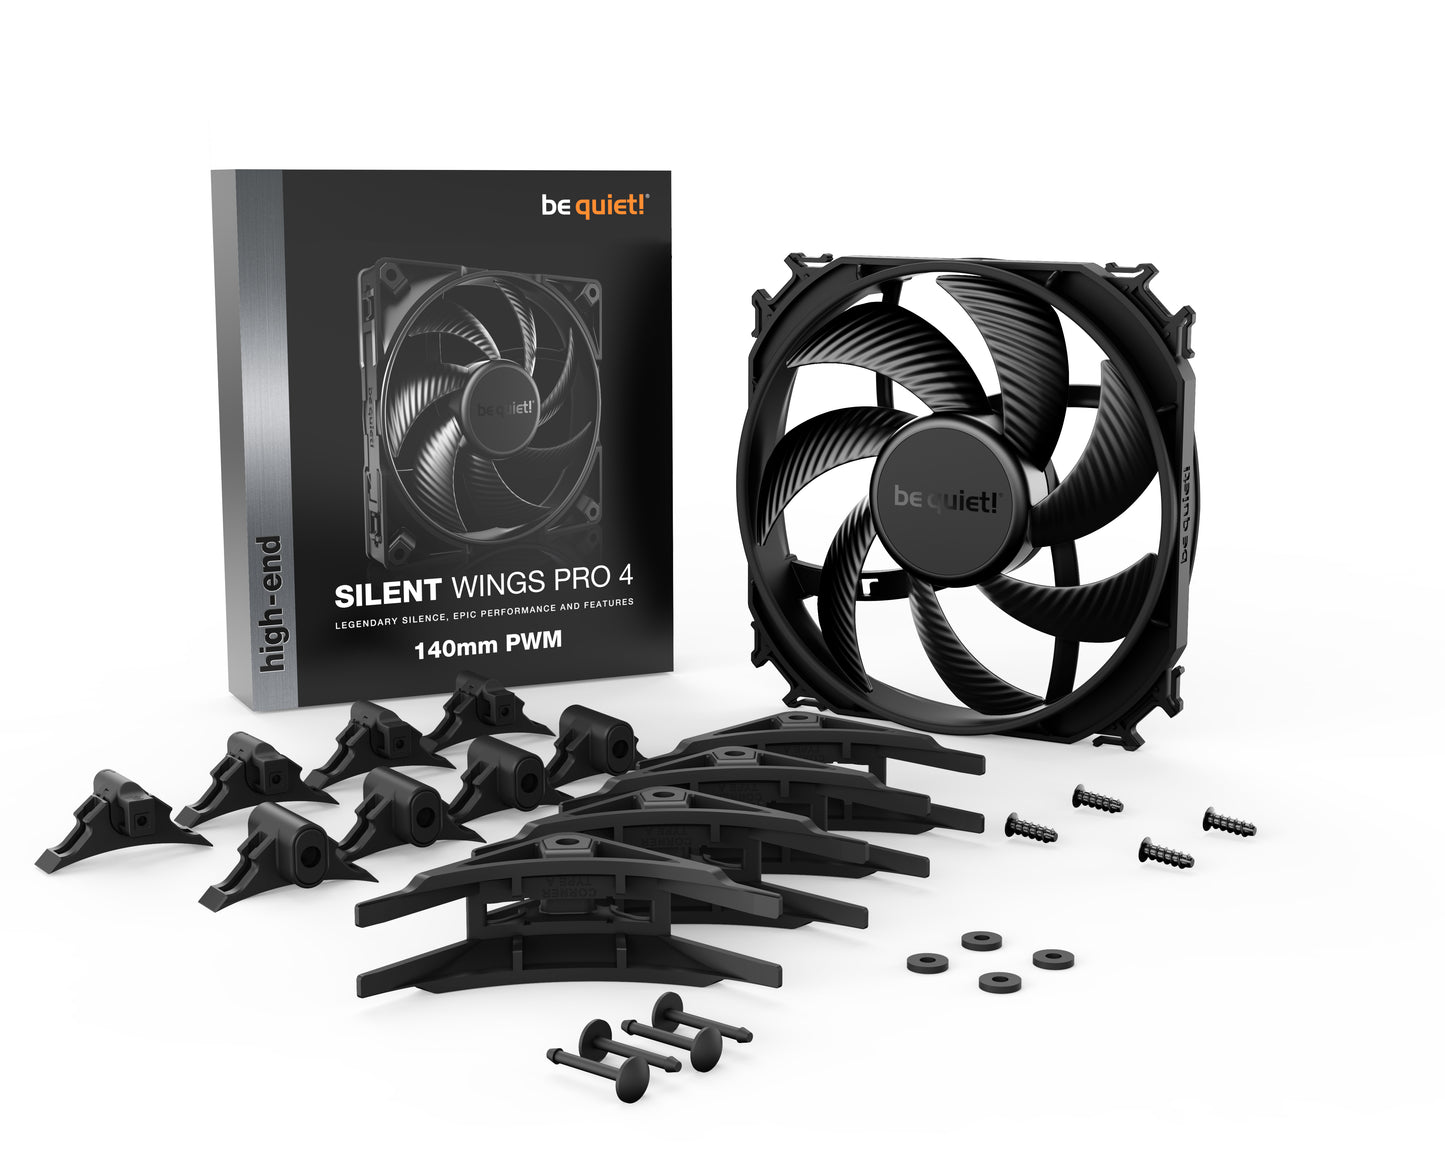 Be Quiet SILENT WINGS PRO 4 140mm PWM Legendary silence, epic performance and features (BL099)